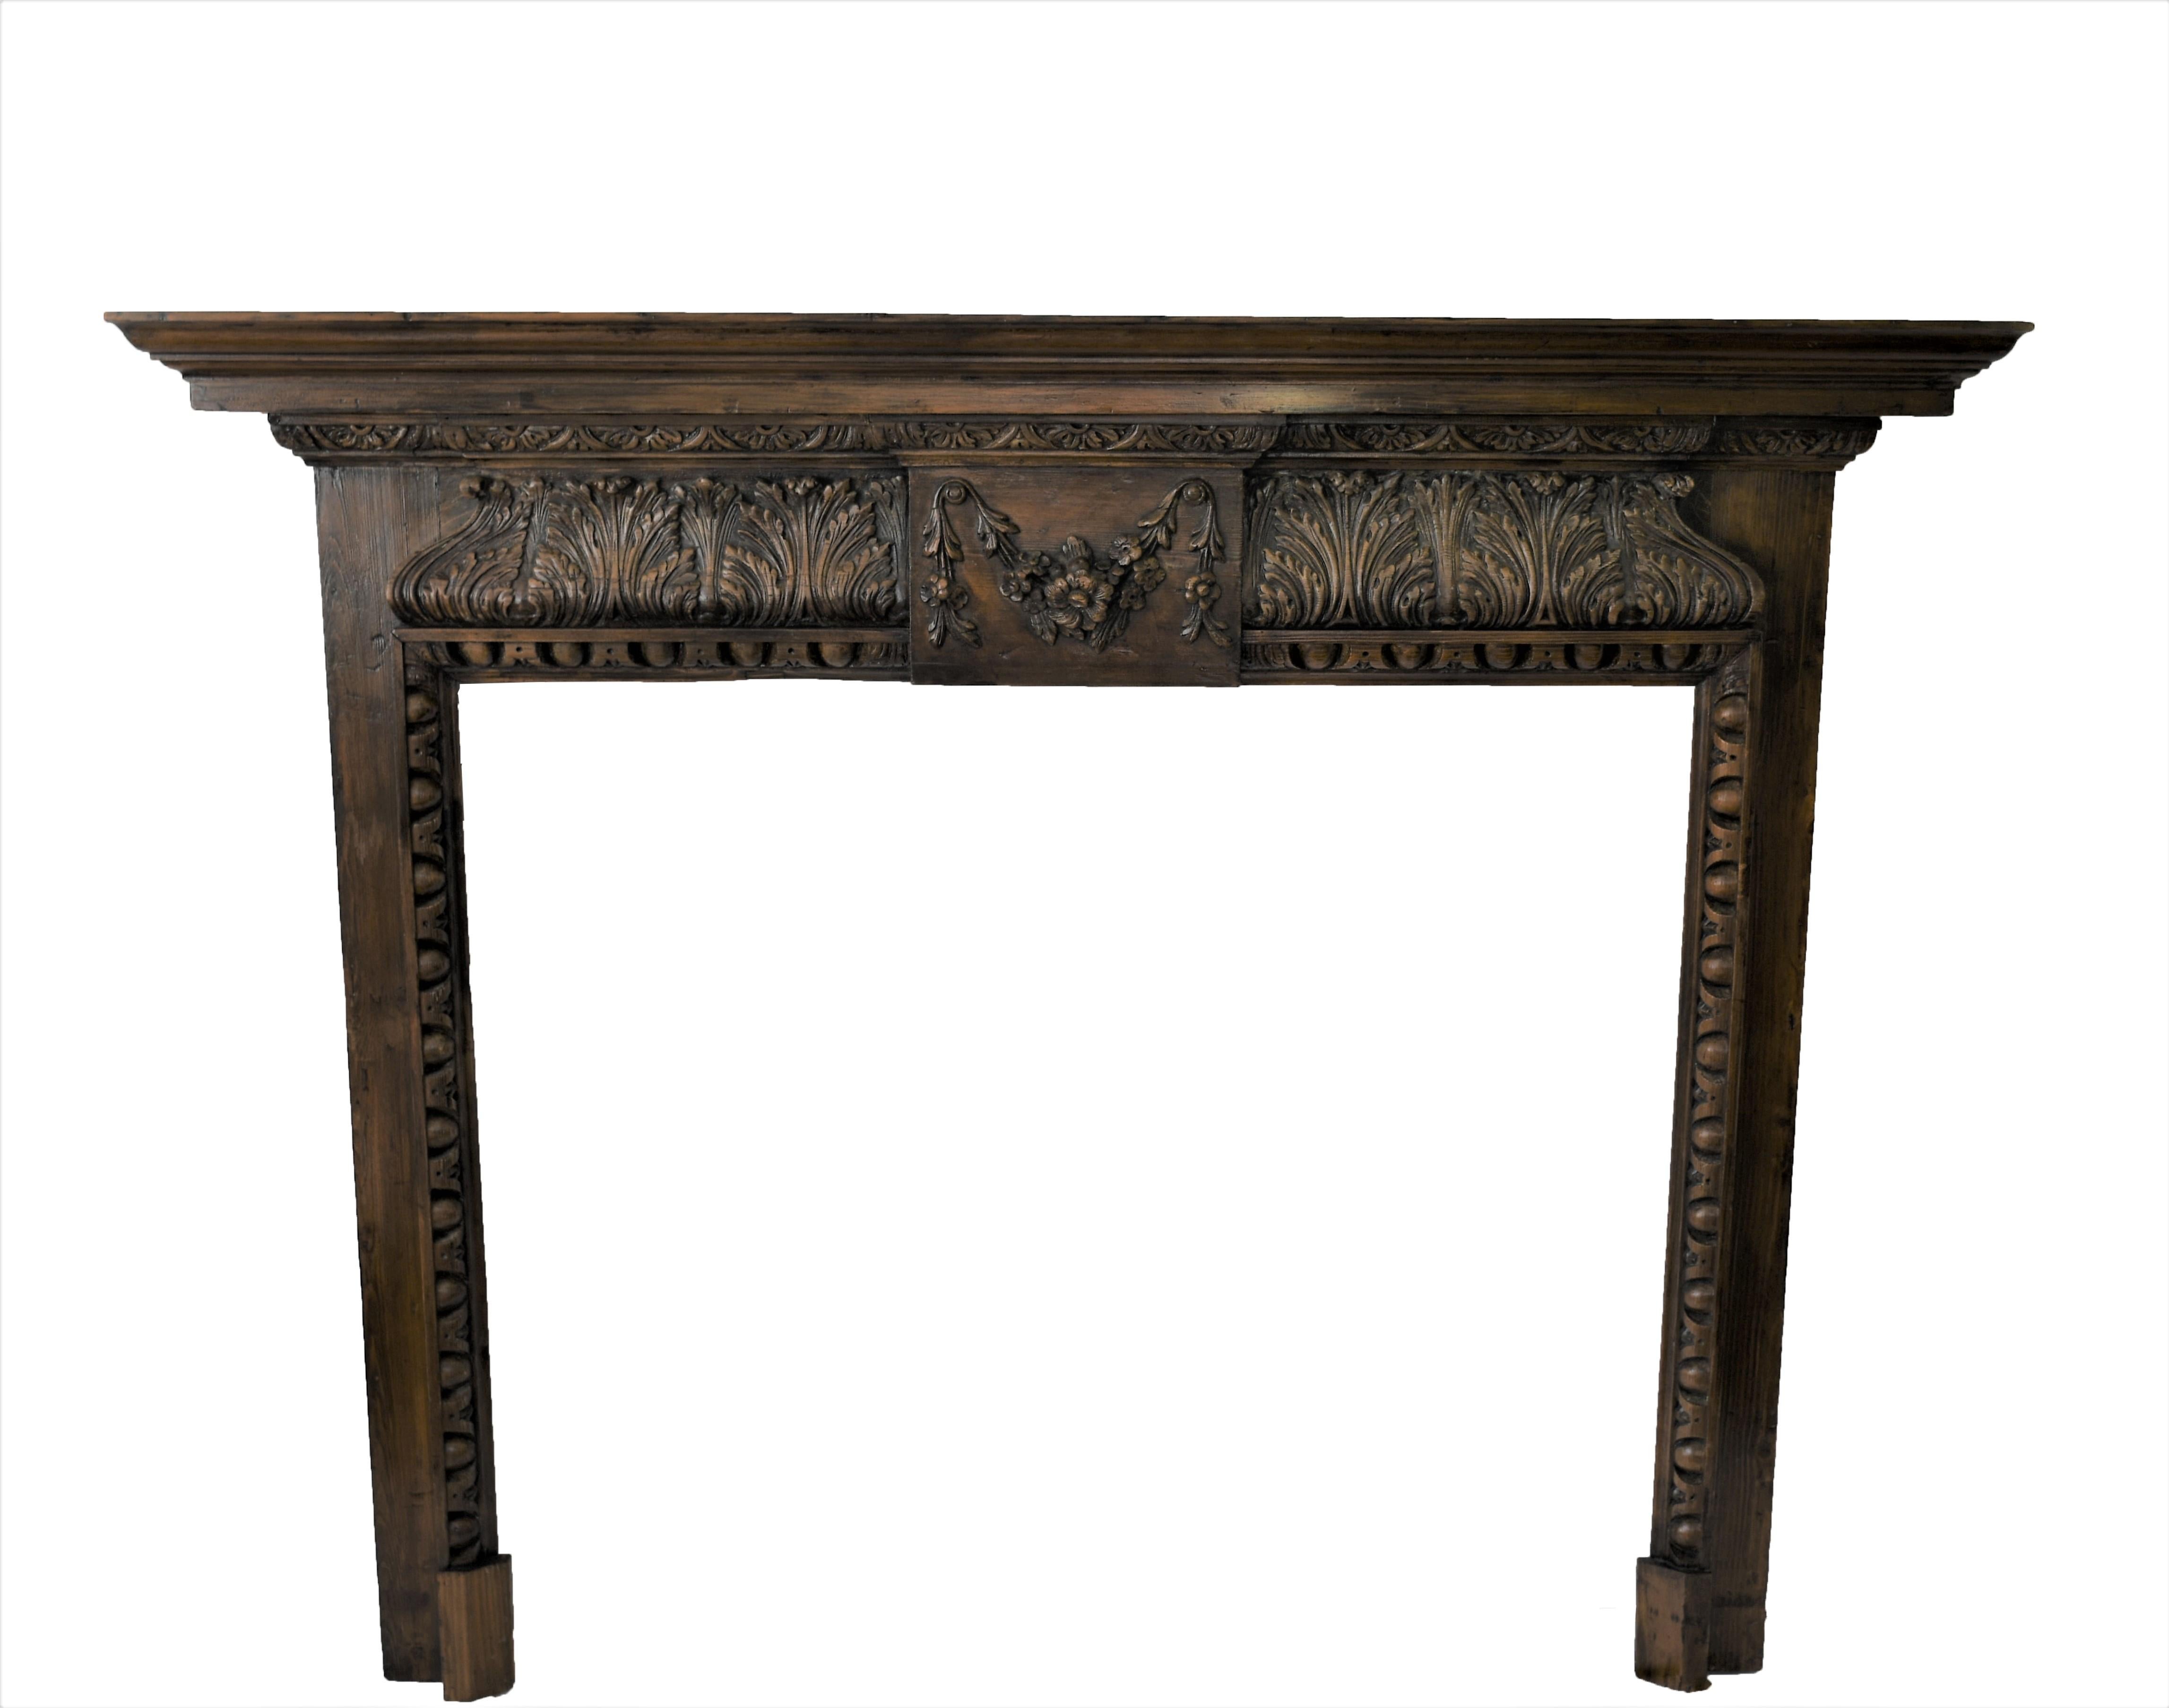 Impressive old generously hand carved pine fire surround mantle from England.

Opening 41